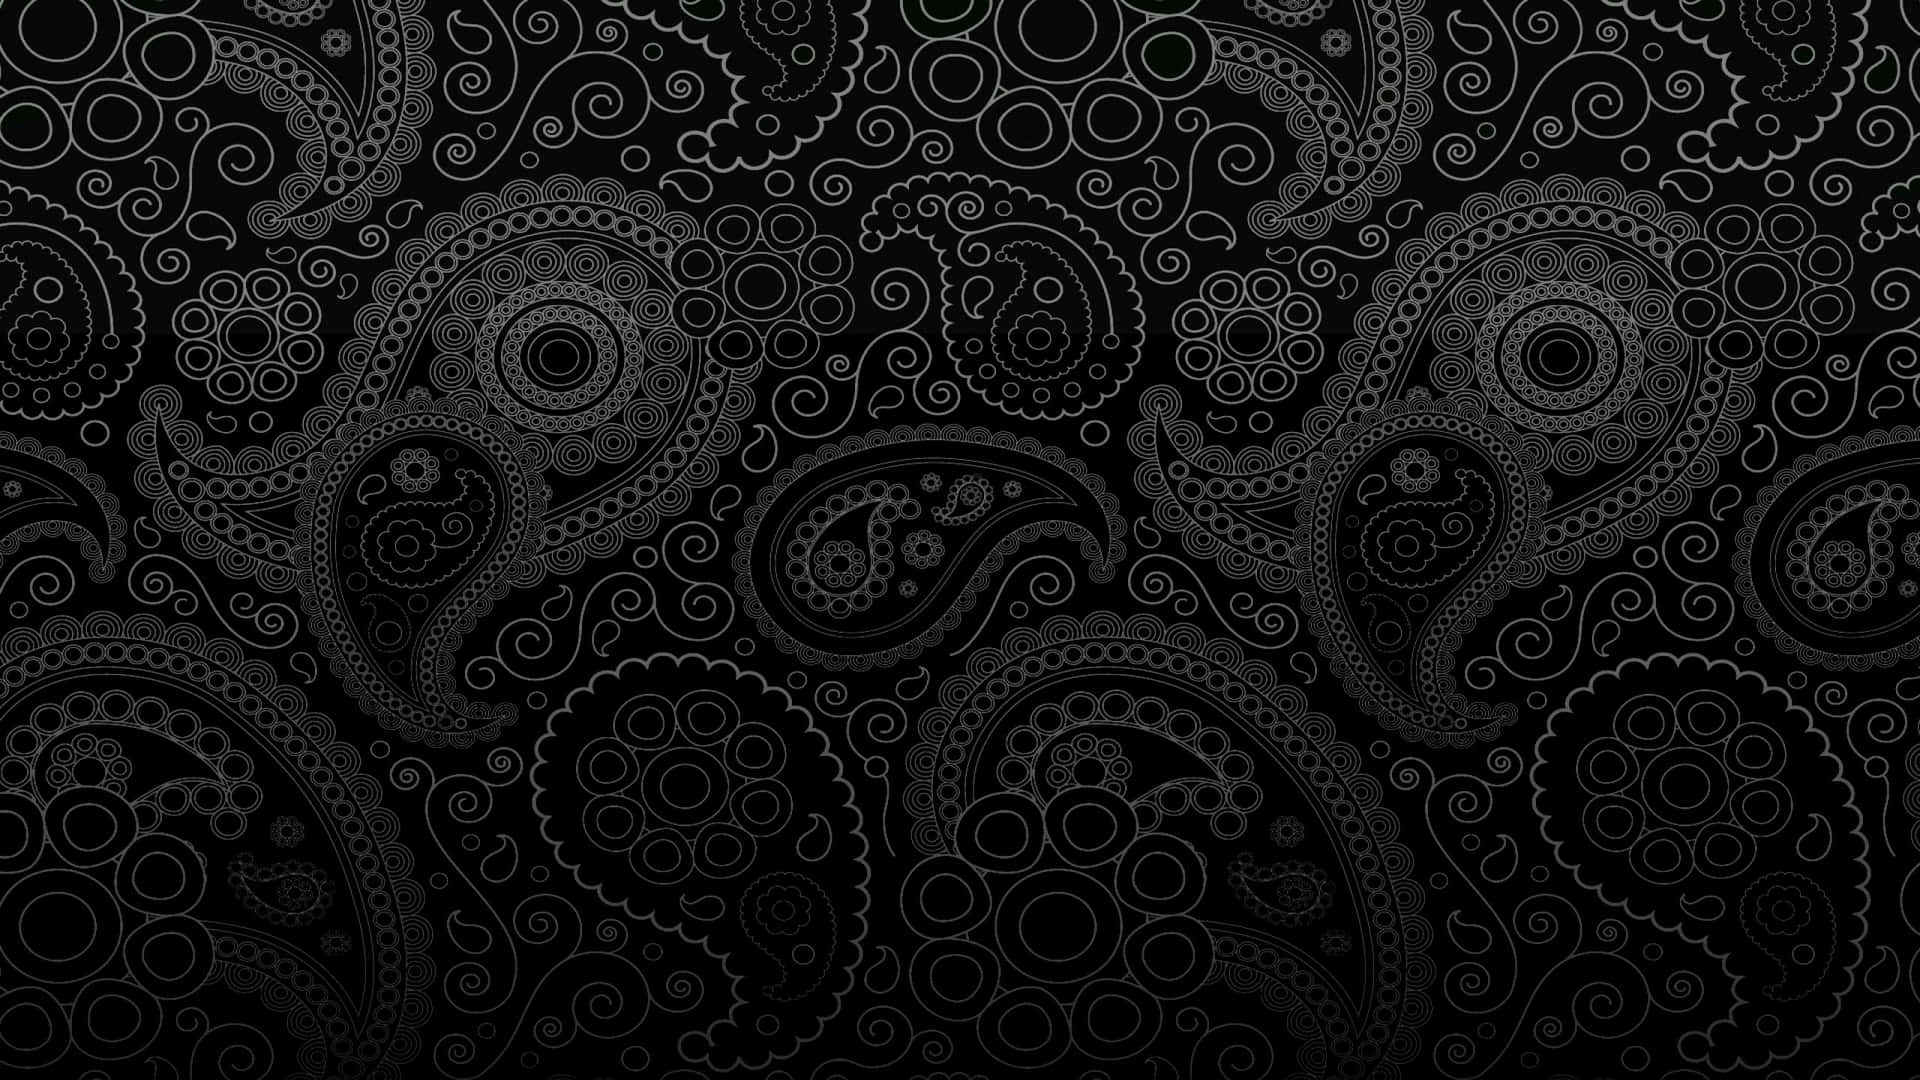 Stay productive with a stylish and professional Black Zoom background